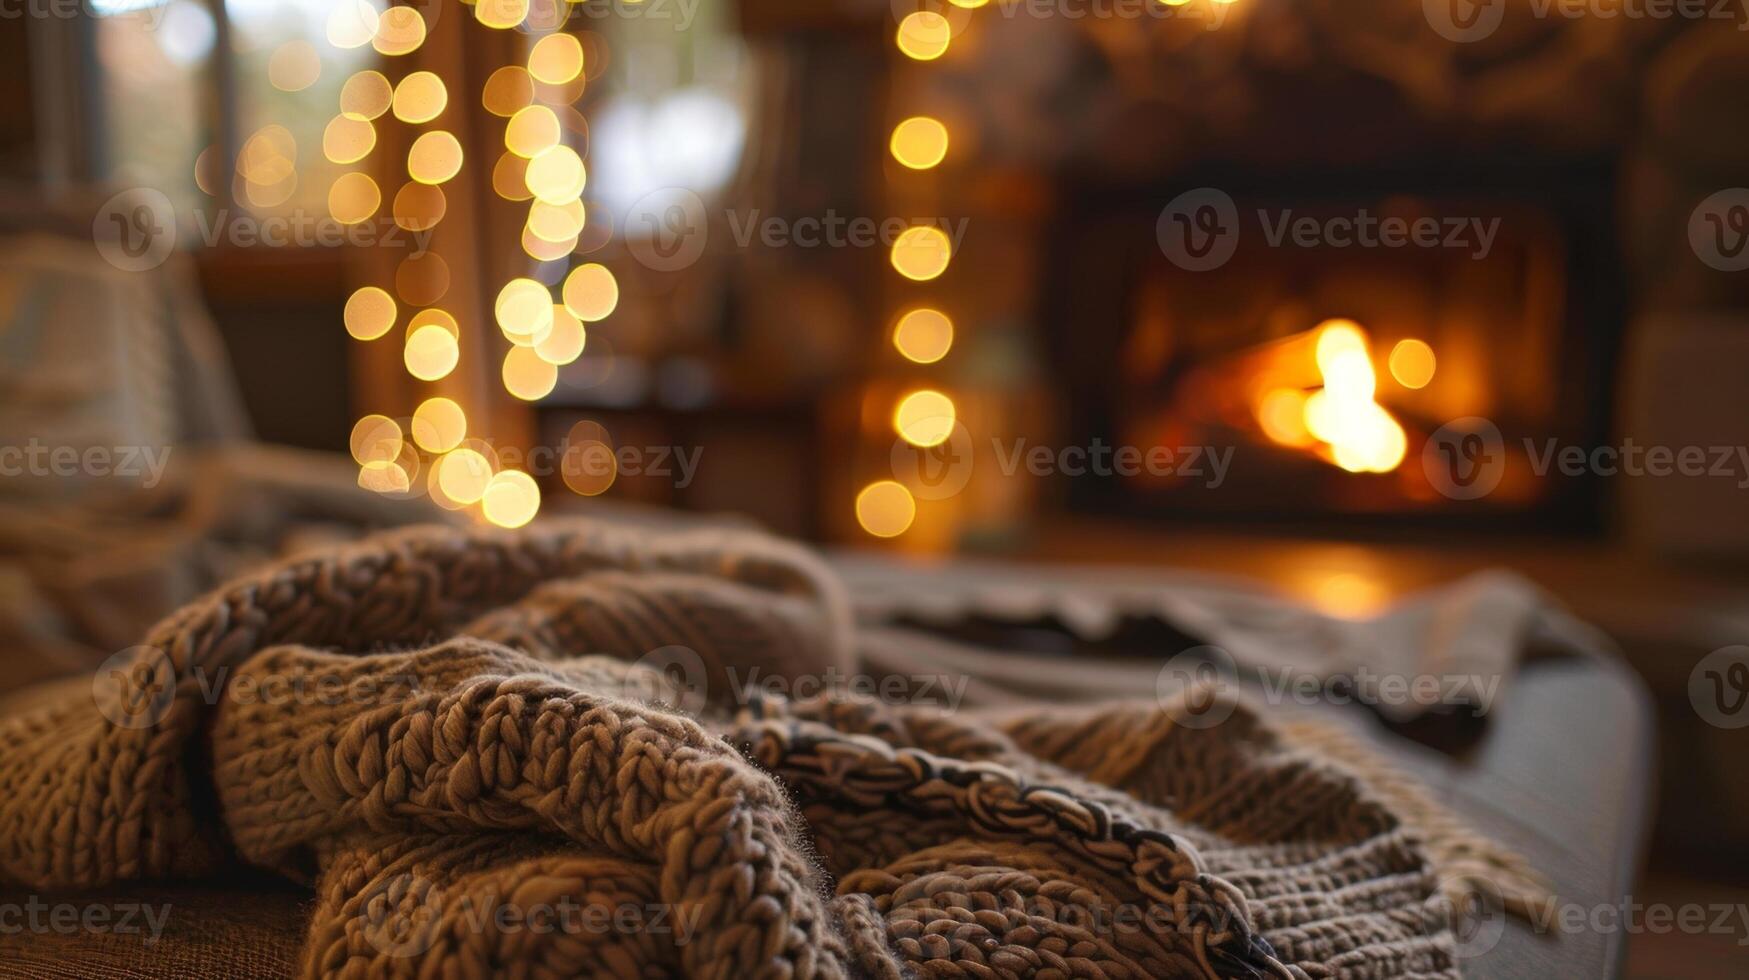 The warmth of the fireplace is complemented by plush blankets and pillows creating the perfect spot to snuggle up and relax. 2d flat cartoon photo